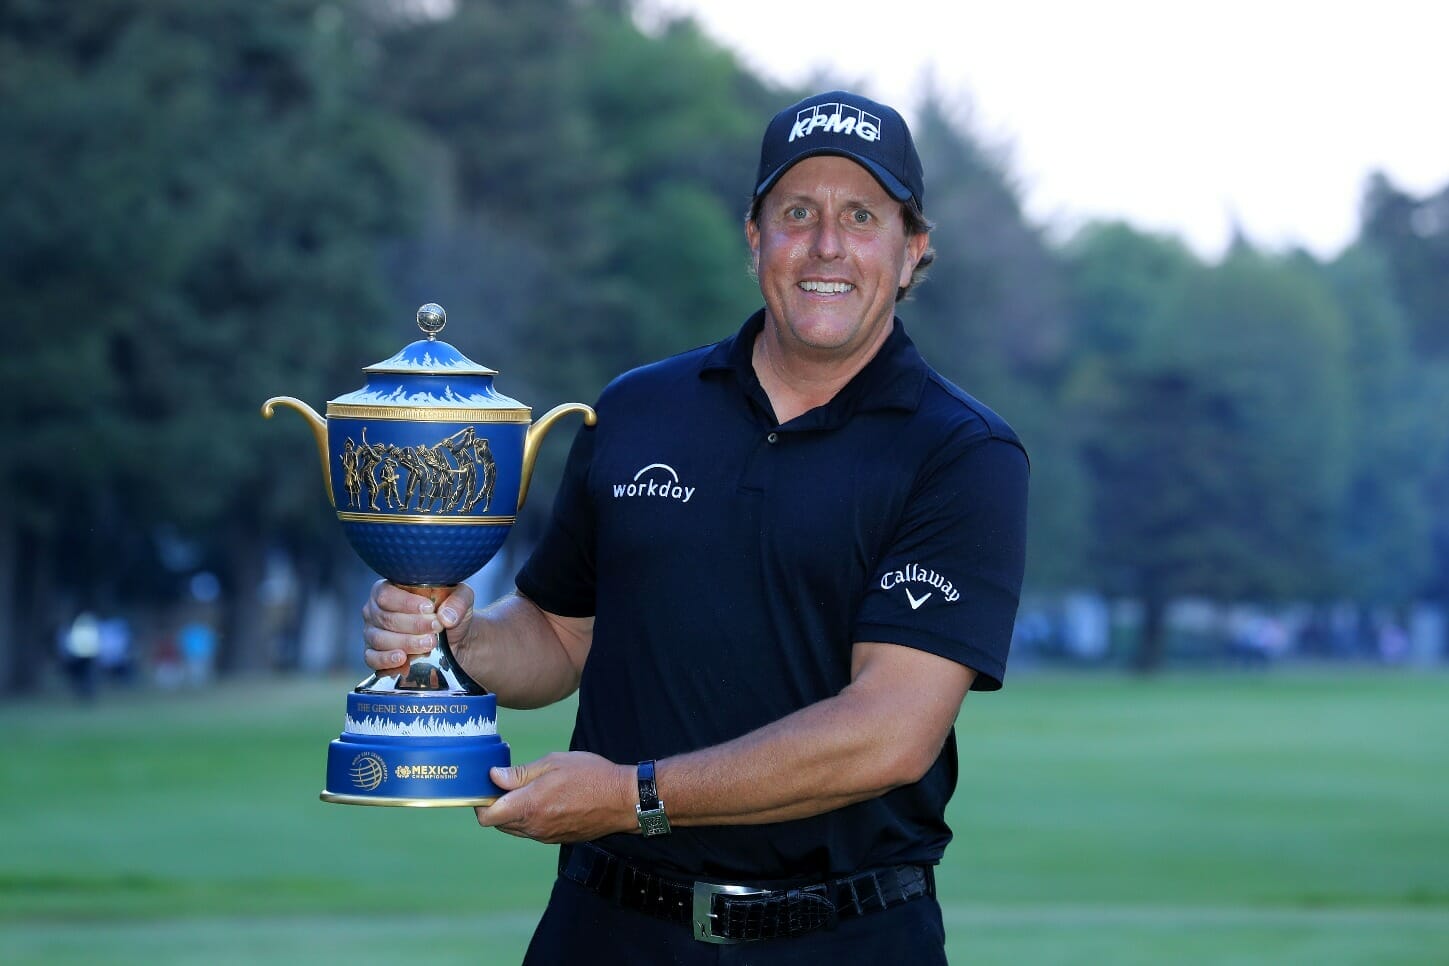 Mickelson ends 5 year winless streak claiming WGC in Mexico